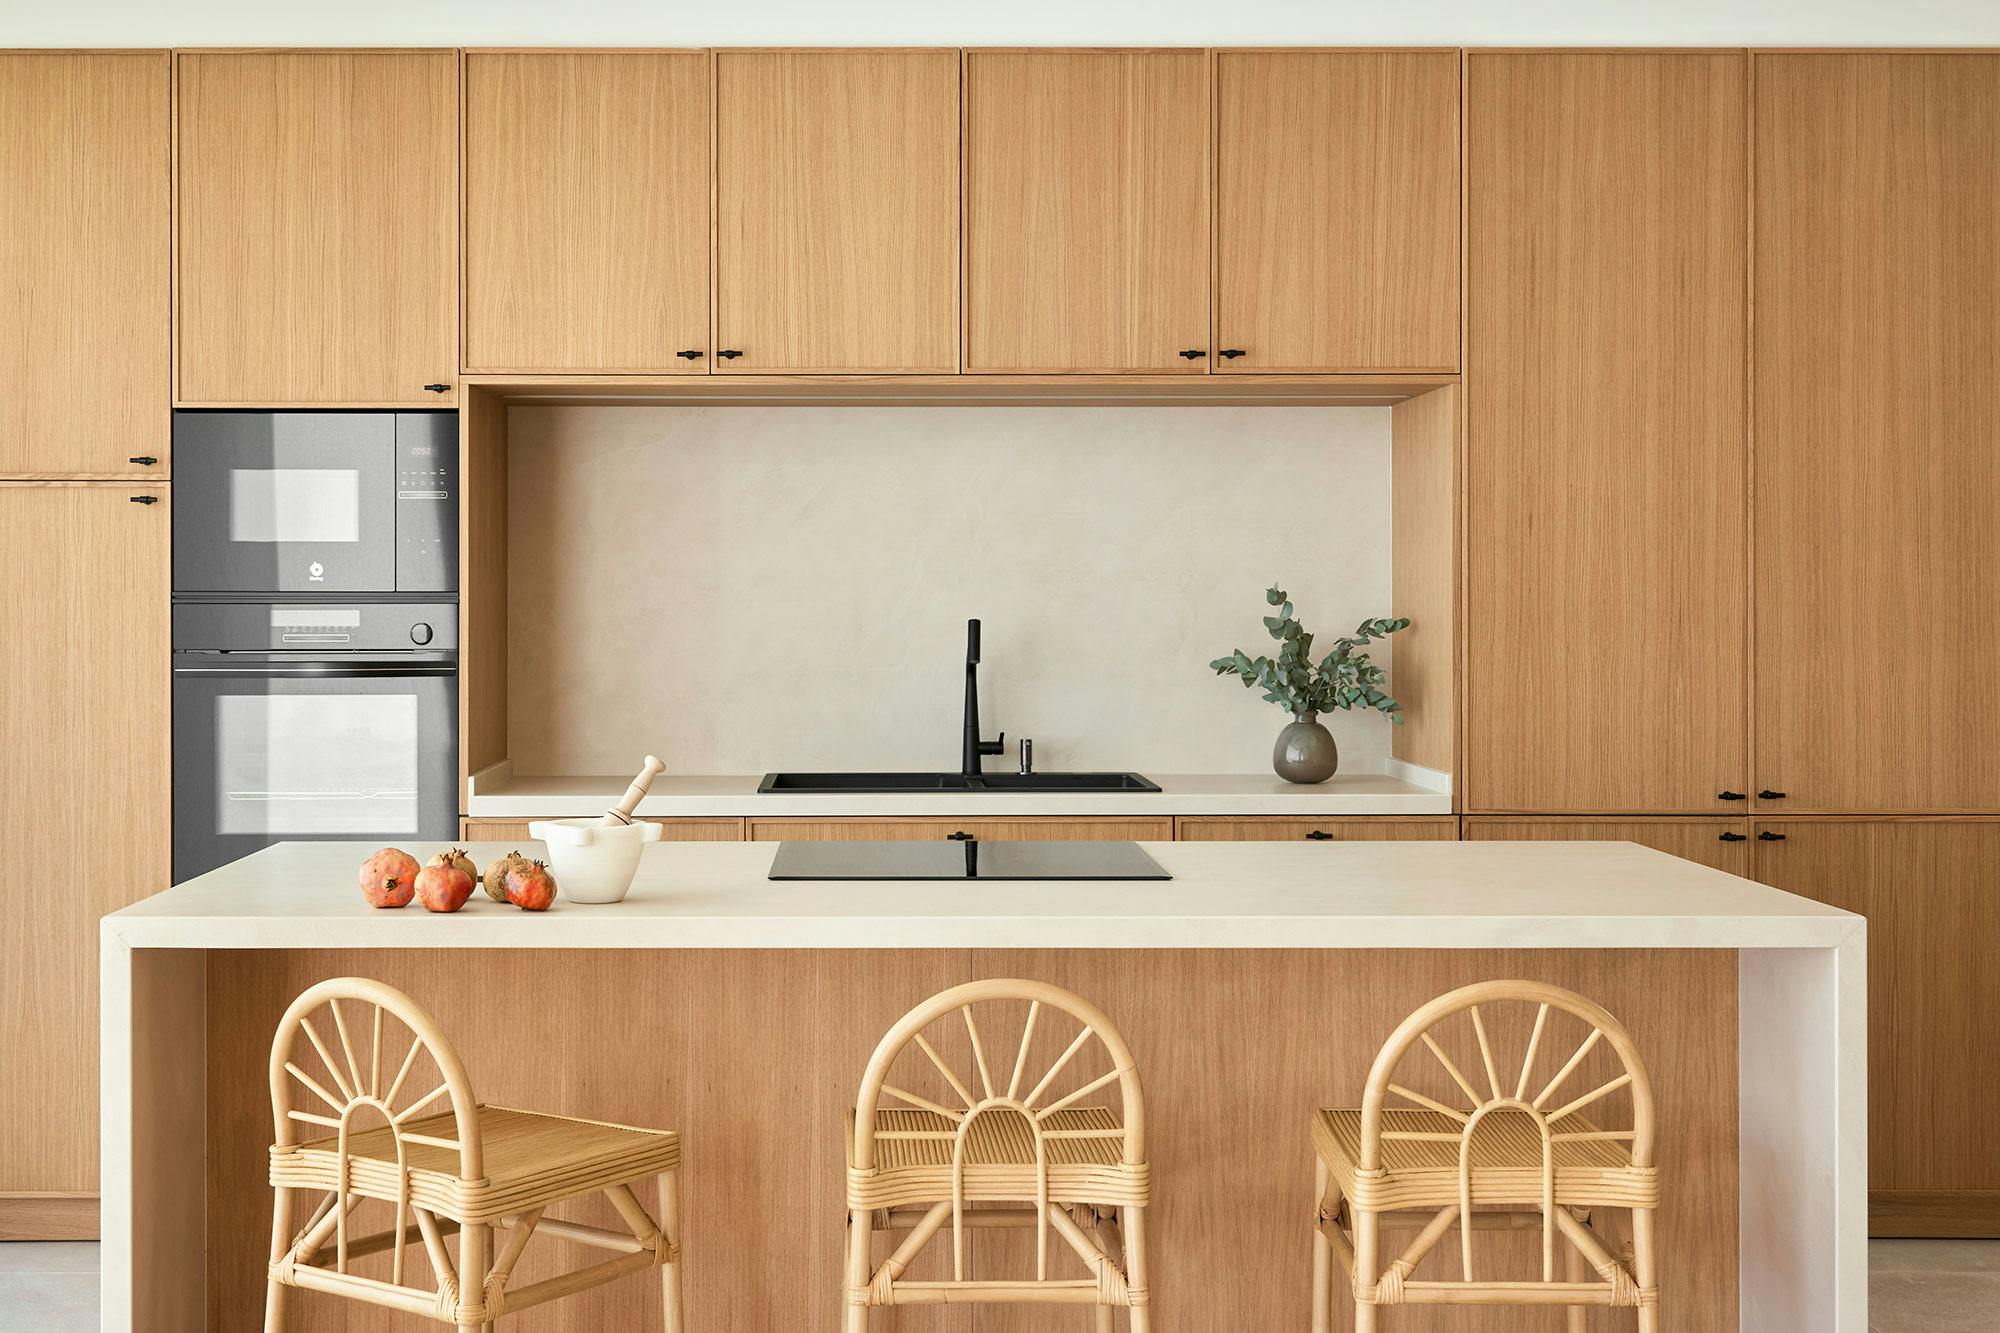 Numéro d'image 46 de la section actuelle de DKTN Sirius adds a welcoming touch to the kitchens of a residential development in Dubai de Cosentino France